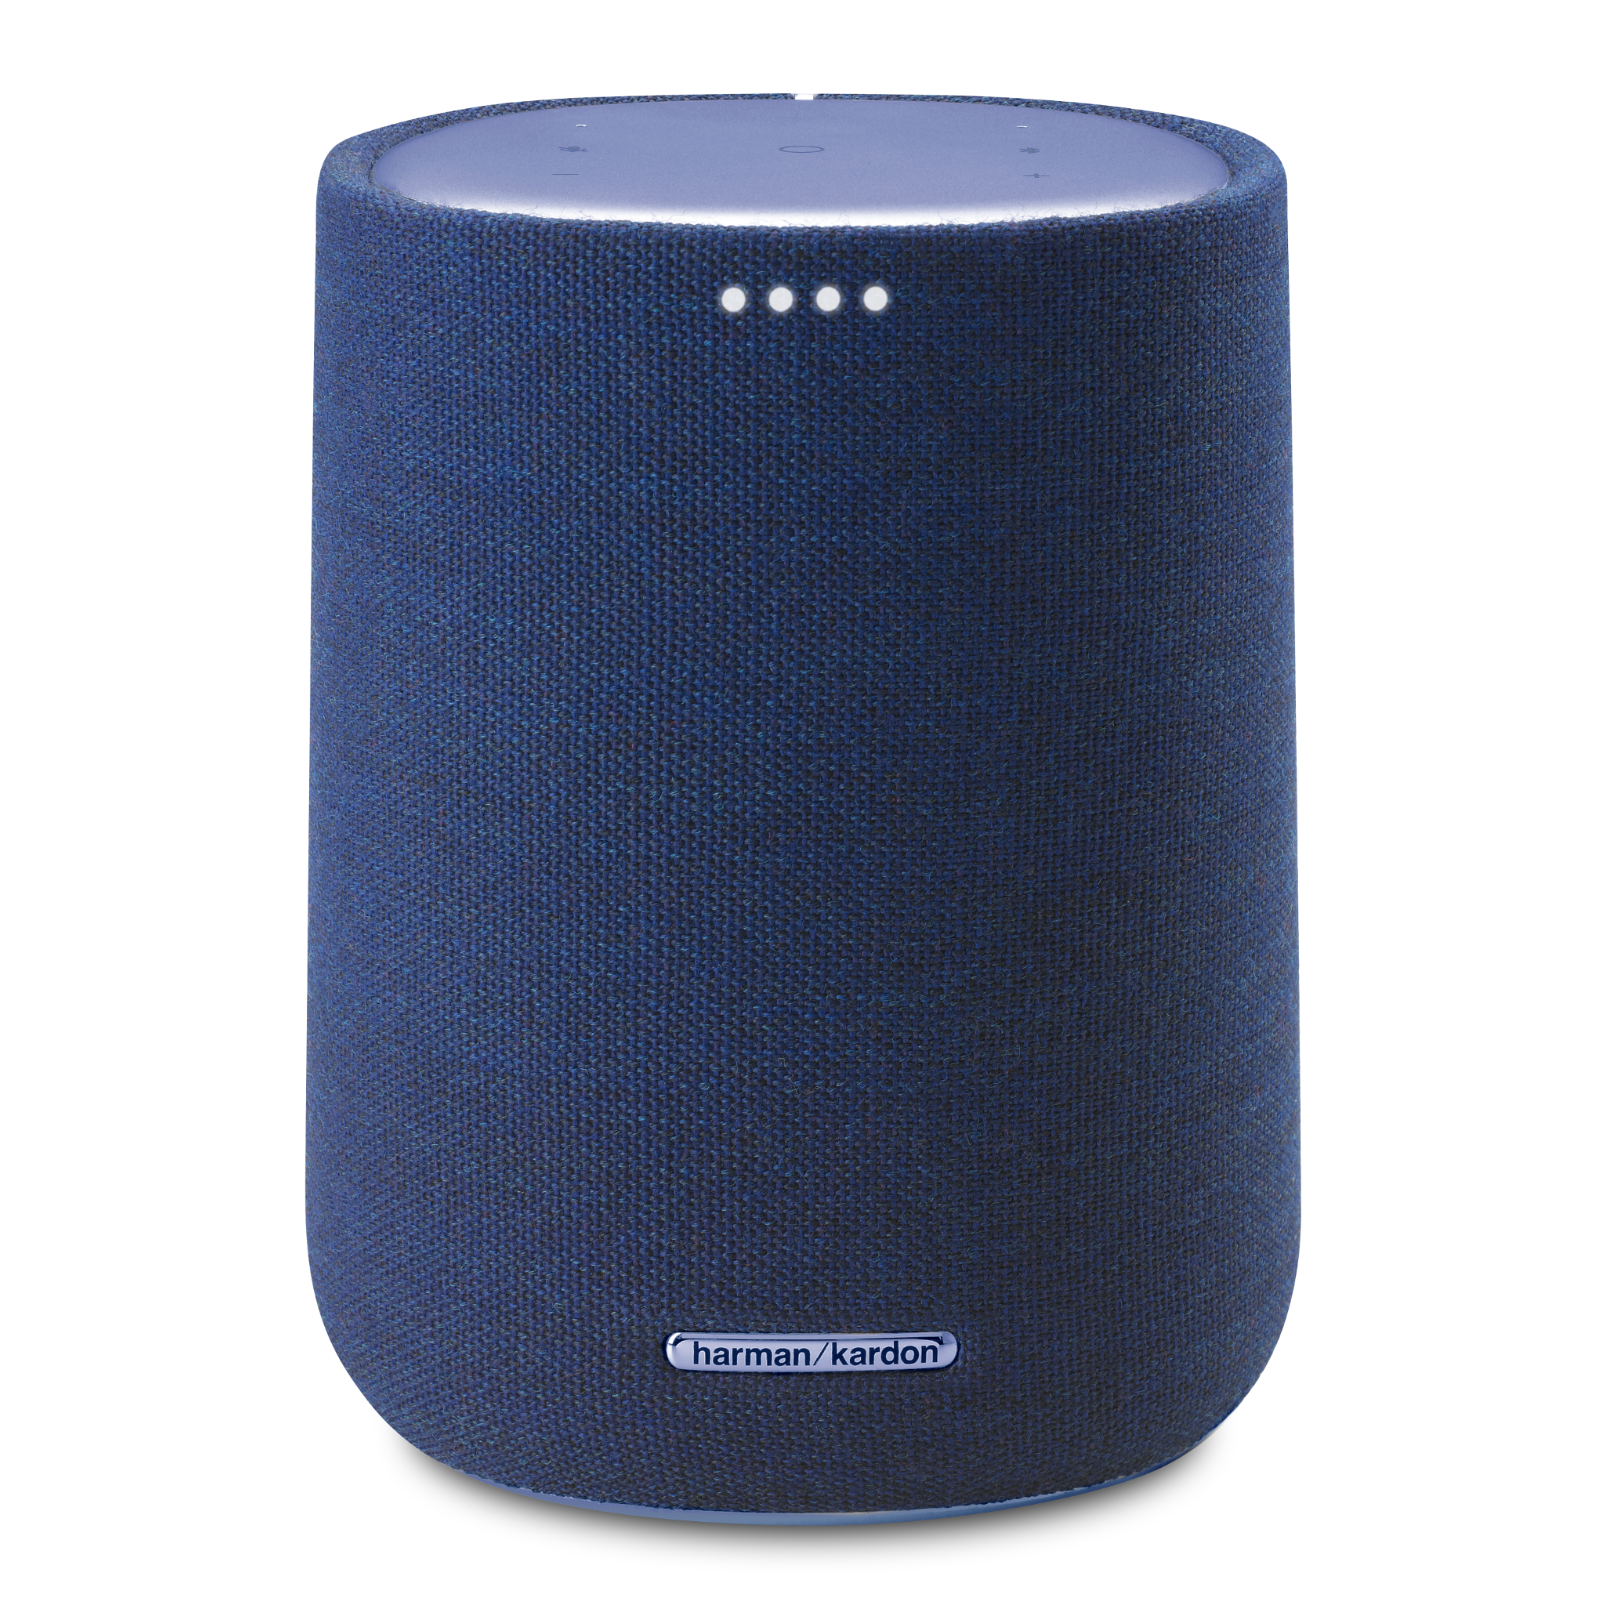 Harman Kardon Citation One MKII - Blue - All-in-one smart speaker with room-filling sound - Hero